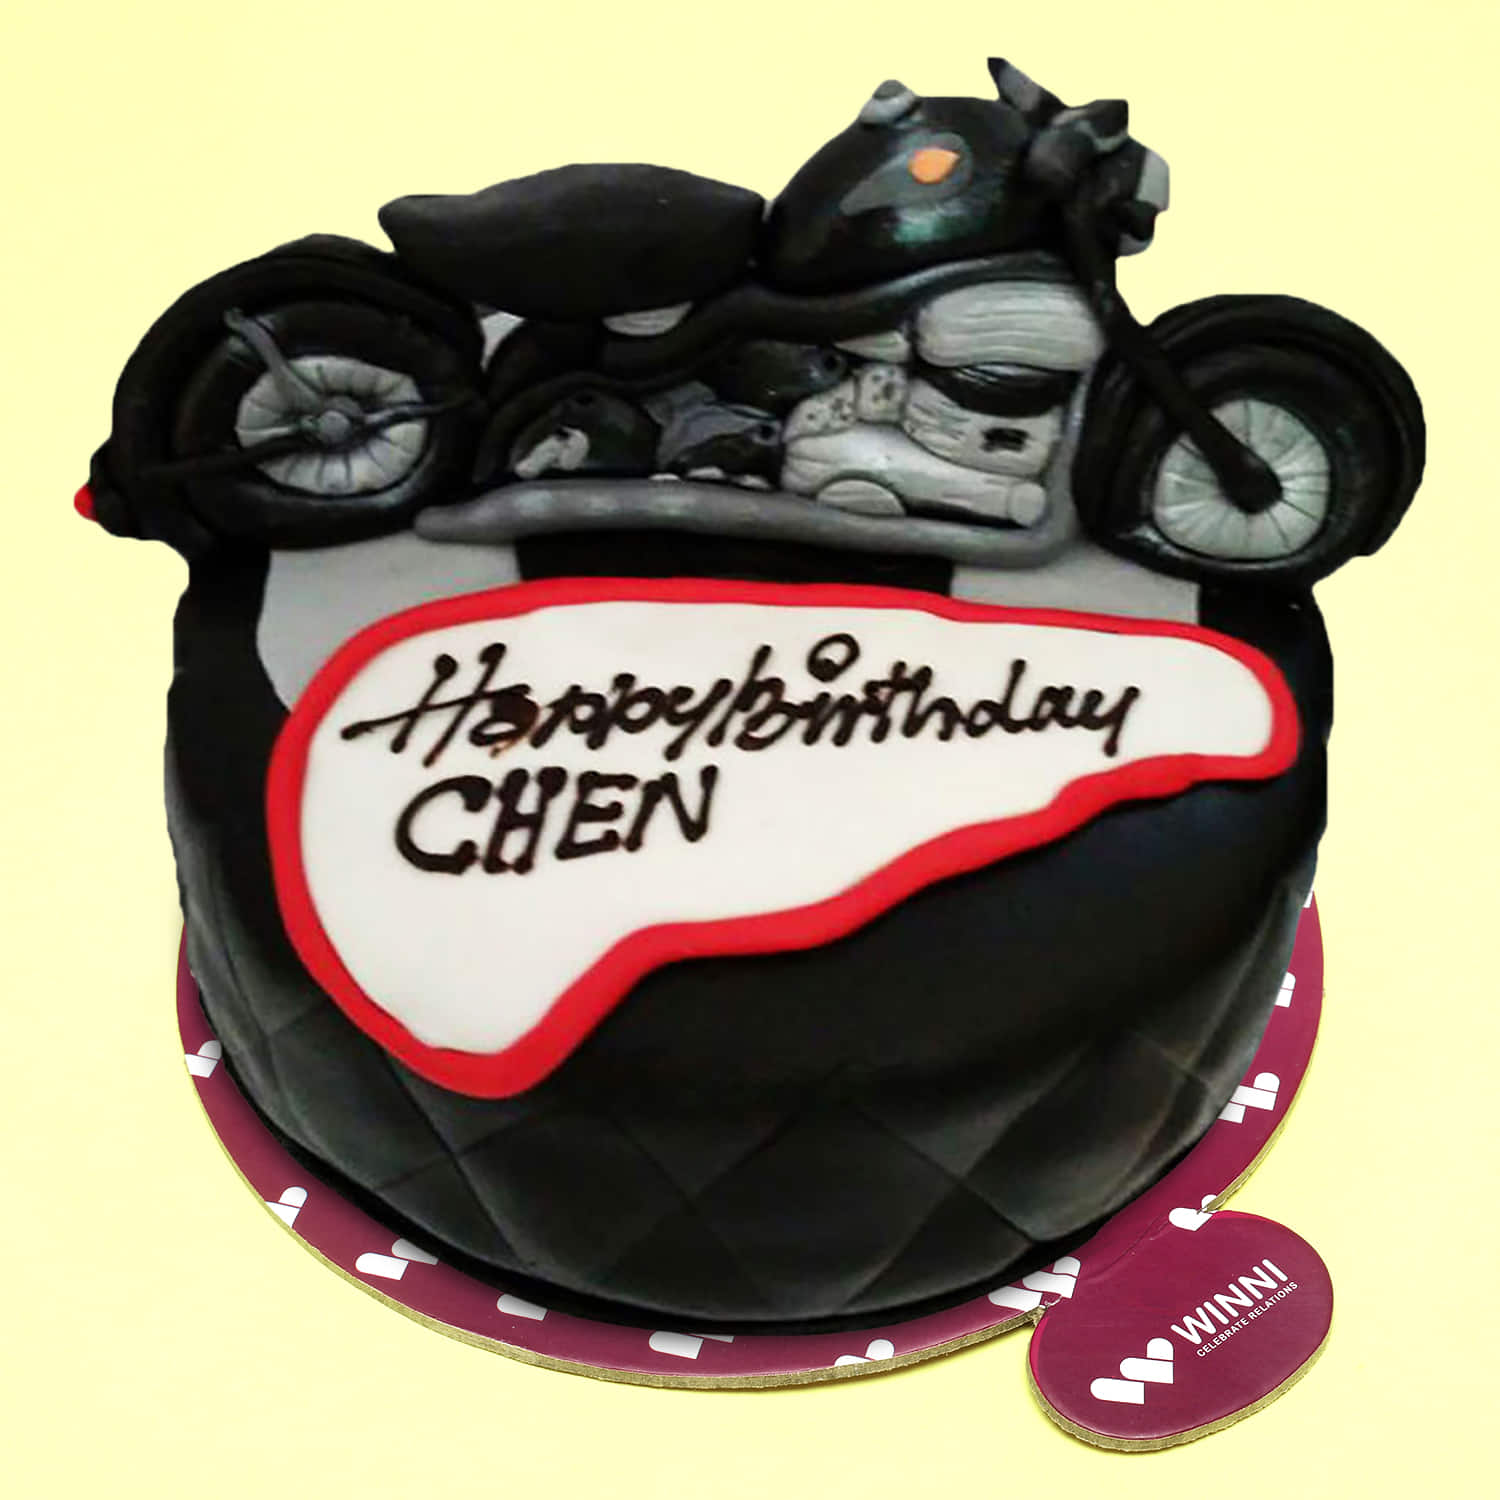 Share more than 74 royal enfield cake latest - in.daotaonec